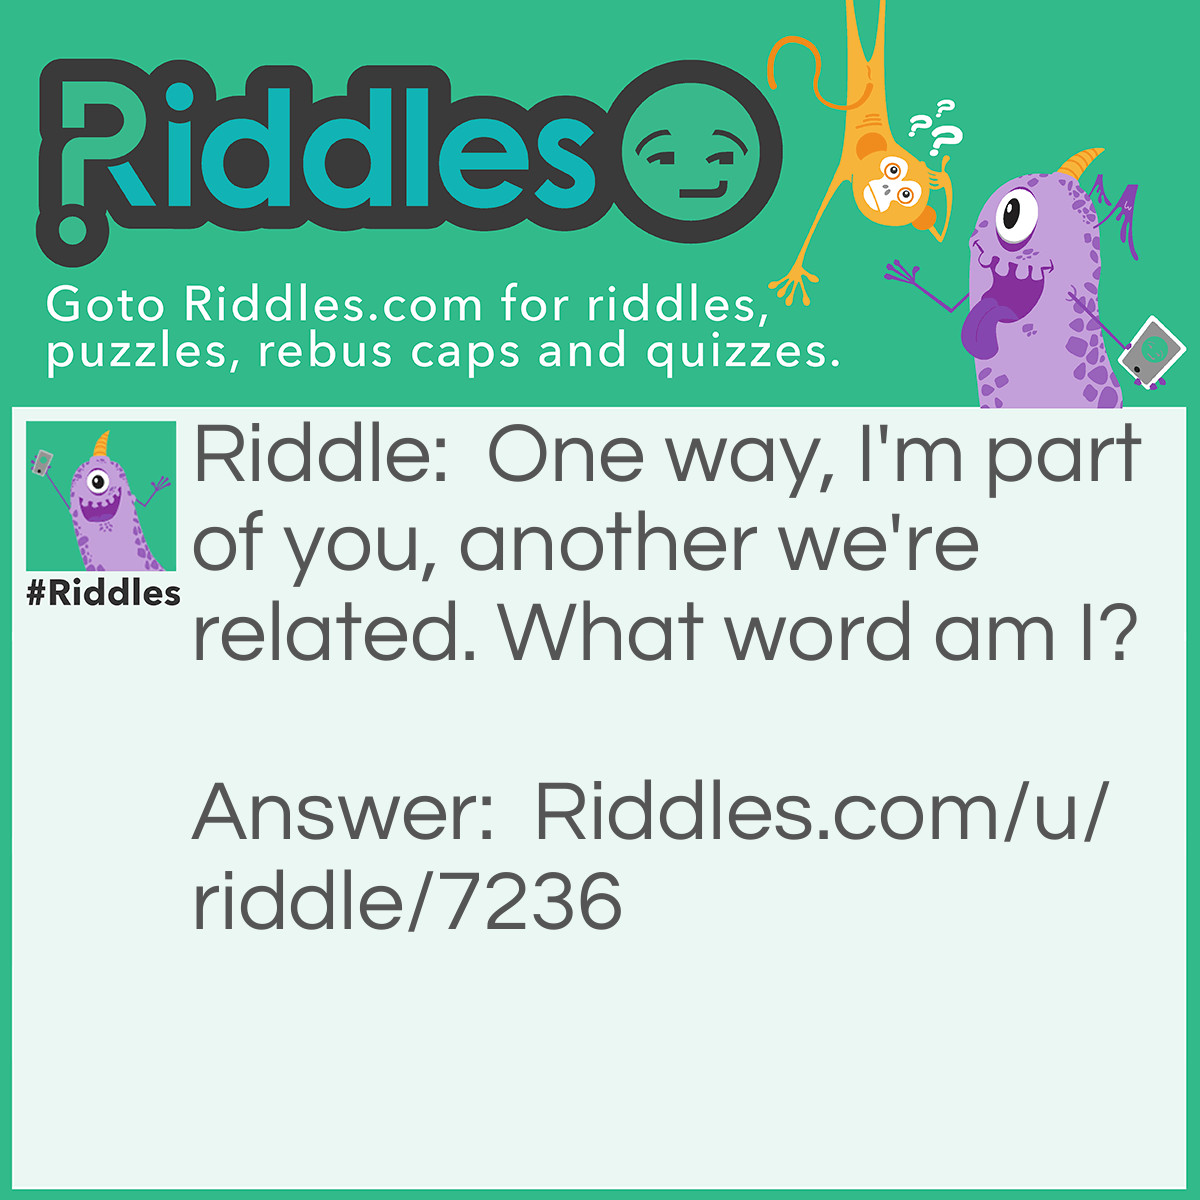 Riddle: One way, I'm part of you, another we're related. What word am I? Answer: Skin/kins. Skin can be rearranged into "kins" and vice-versa.